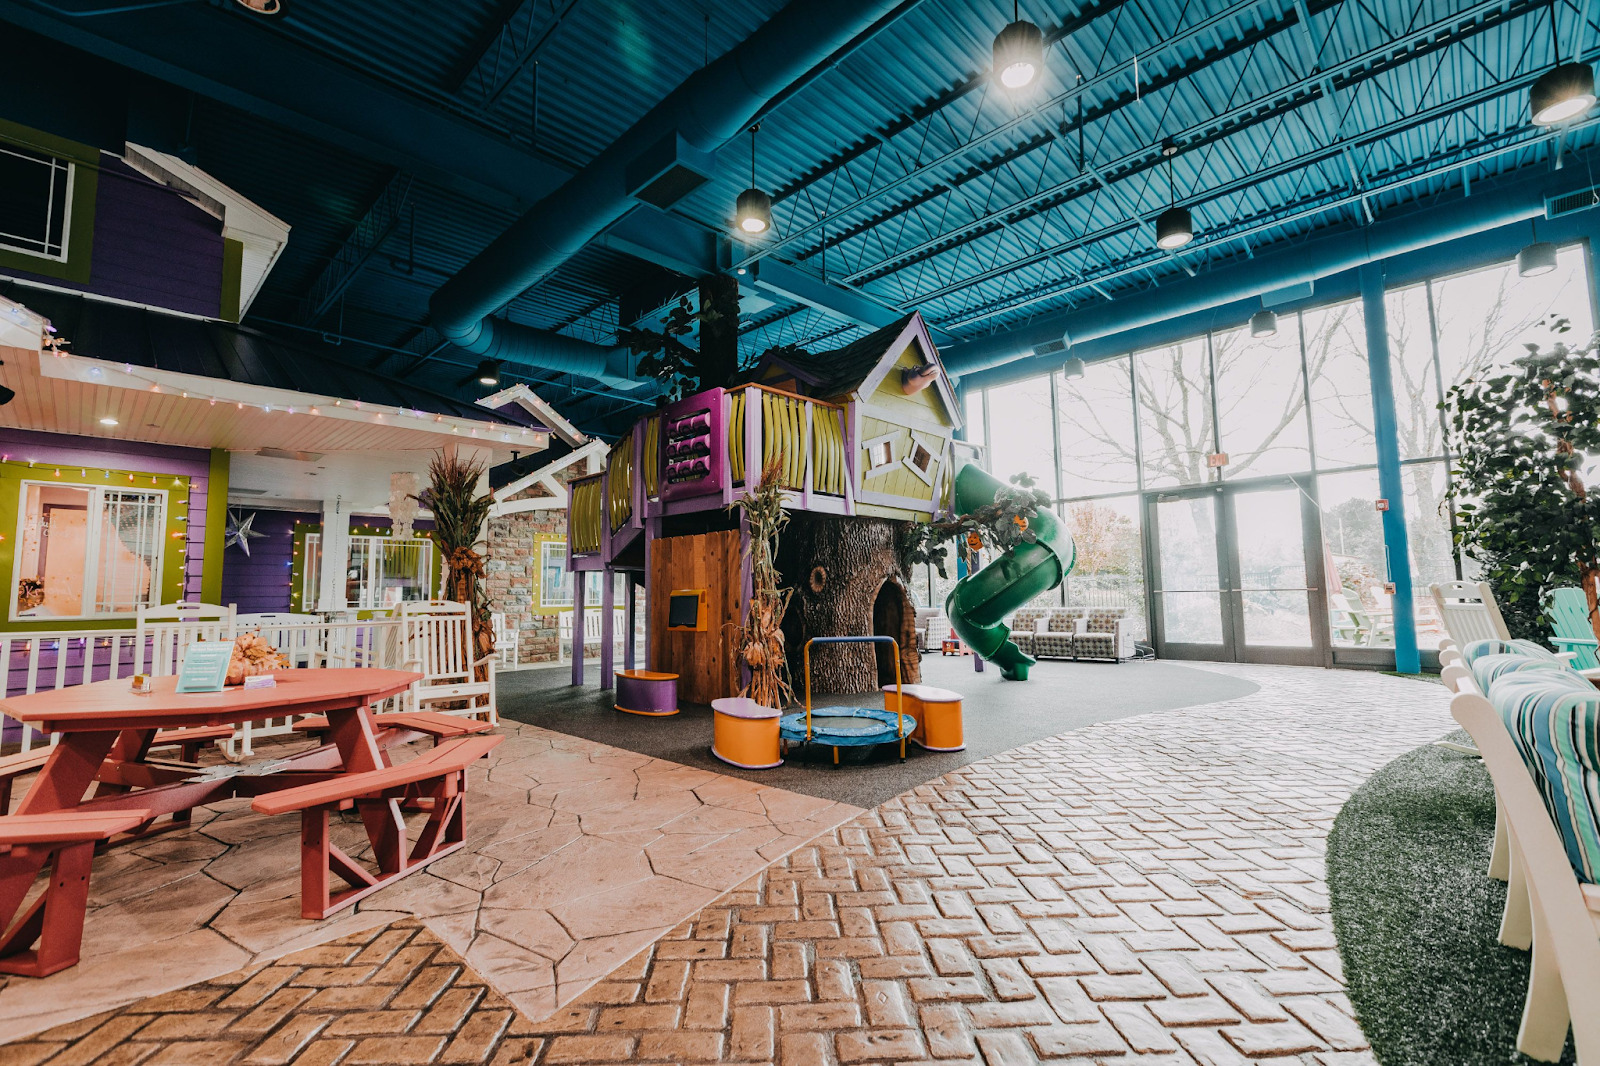  An interior shot of a dental office shows a picnic table and treehouse with slide. 